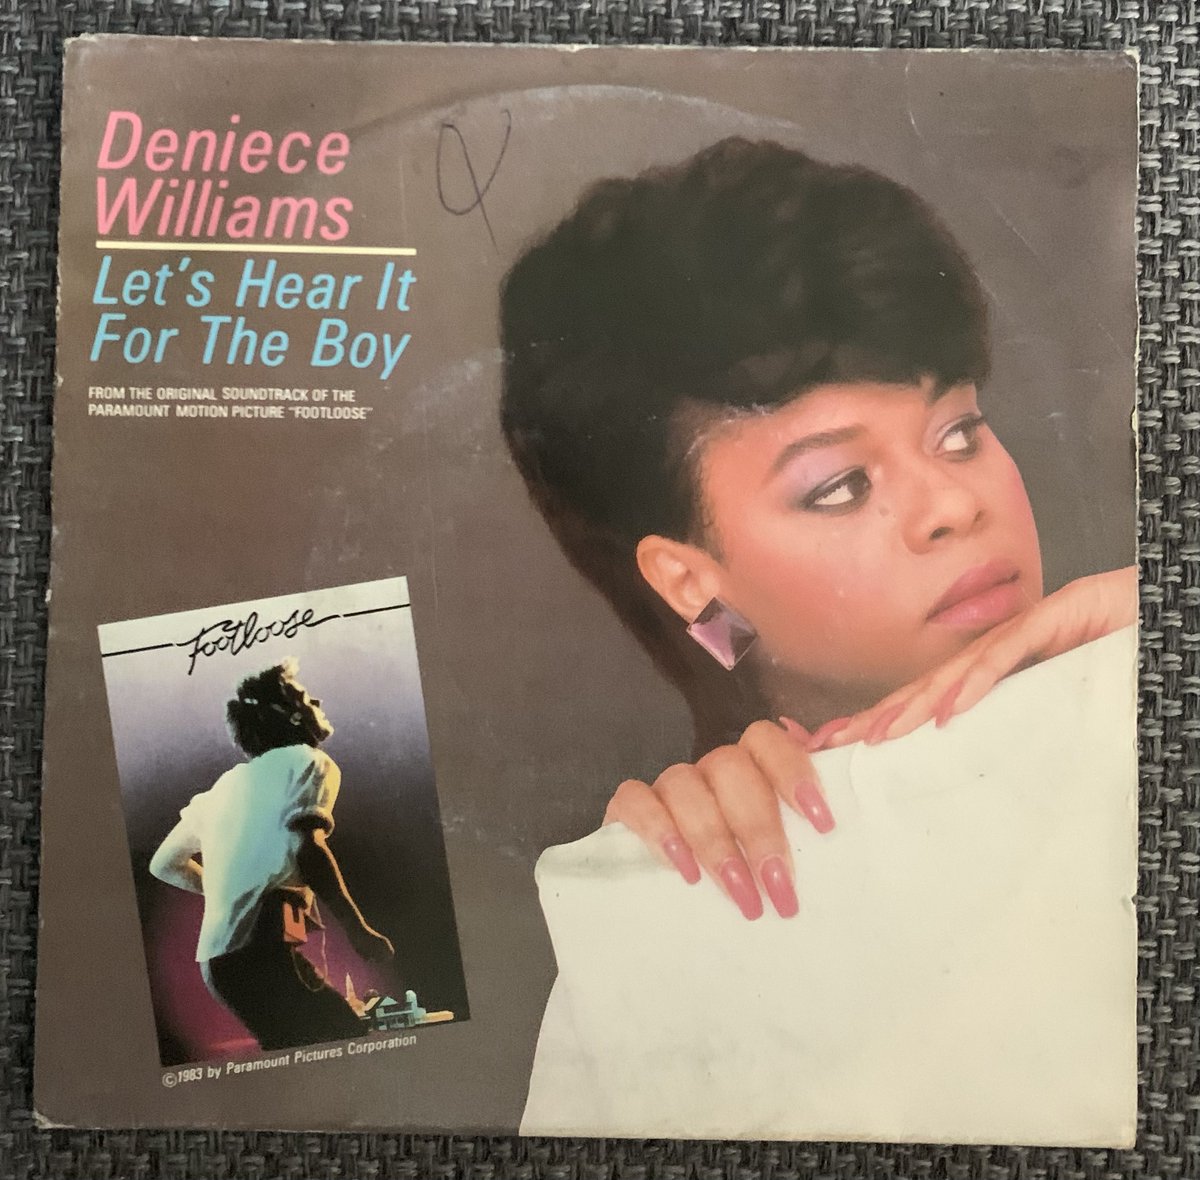 Another smash hit from 1984, from the soundtrack of the movie Footloose. This song by Deniece Williams reached the top 5 here in the Summer of 1984 #deniecewilliams #footloose #letshearitfortheboy #popjustice #retro #80s #pop #popmusic #singlescollection #treasurechest